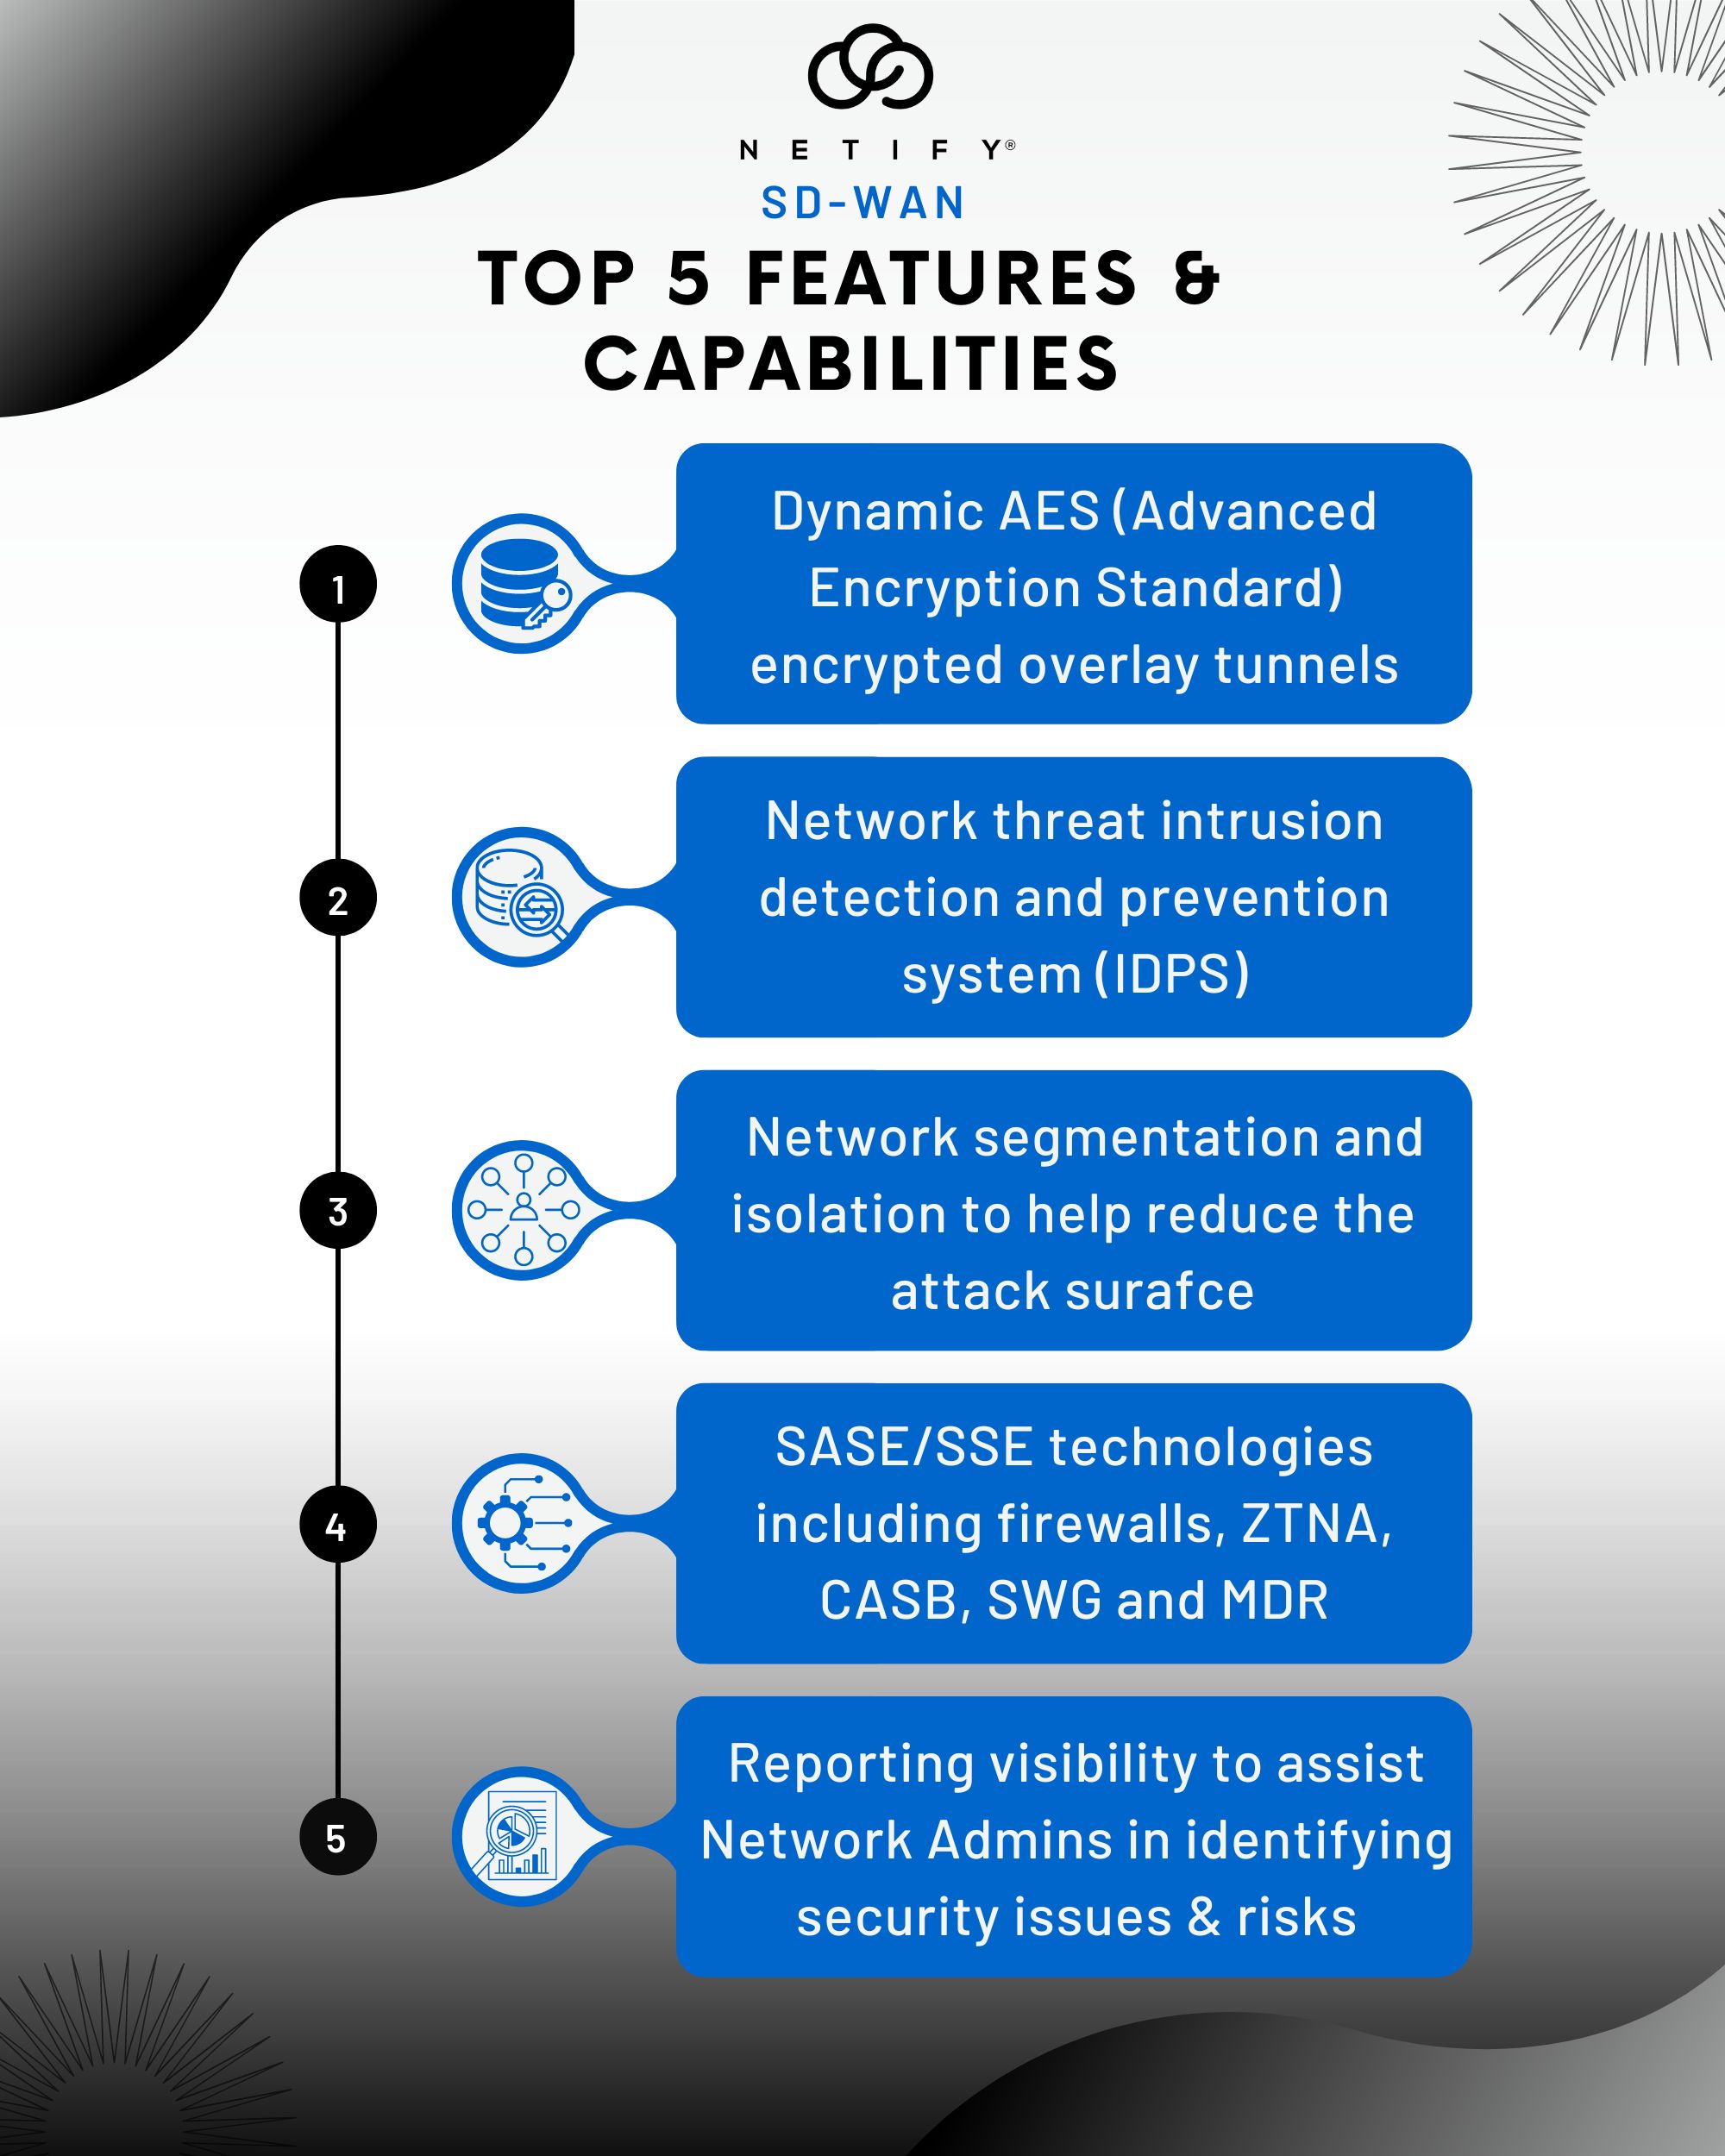 SD-WAN Top 5 Security Features Capabilities